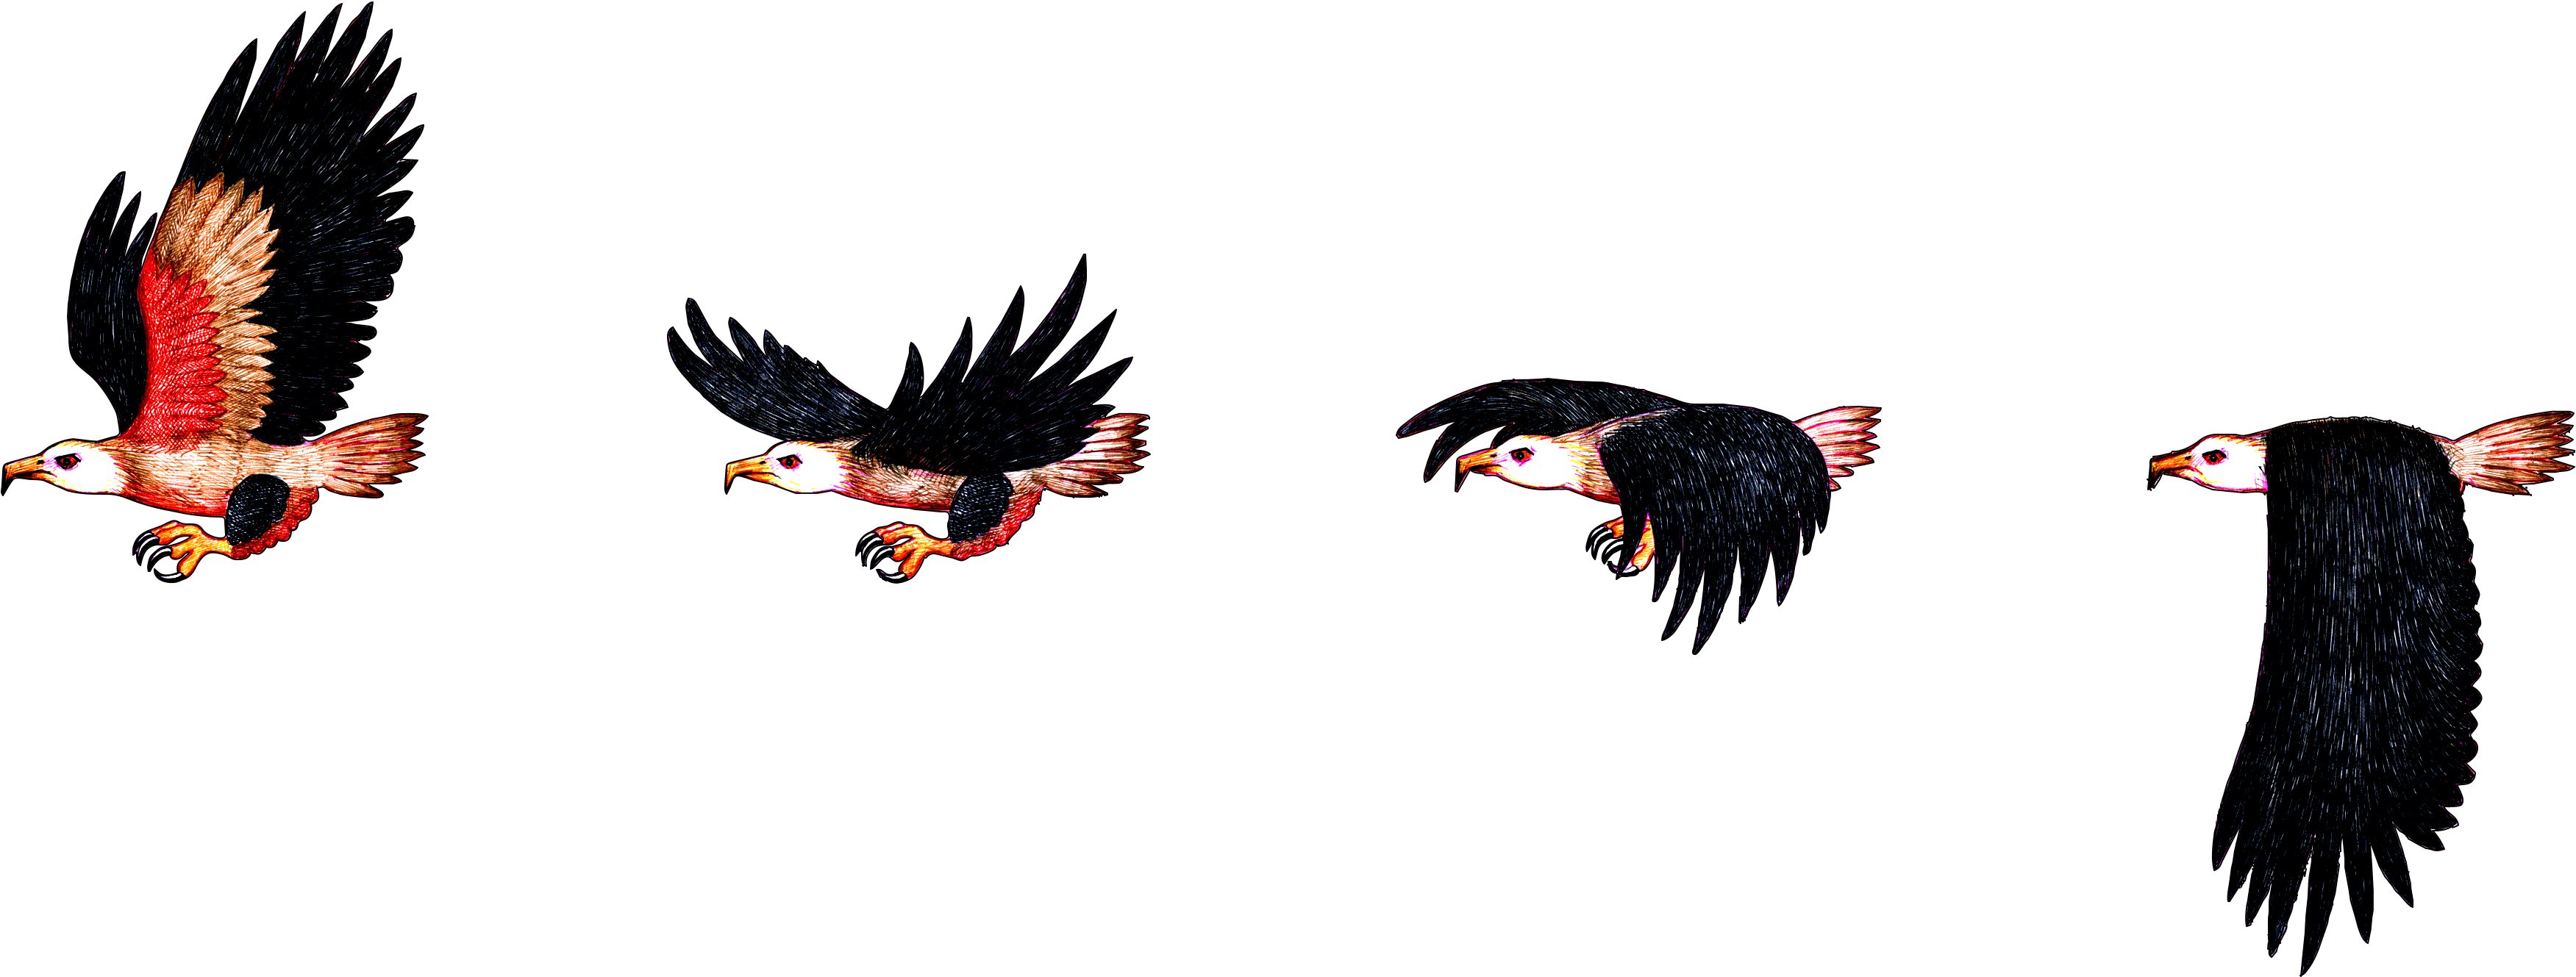 Hd Img, Flight Of The Eagle - Flight (3894x1333), Png Download